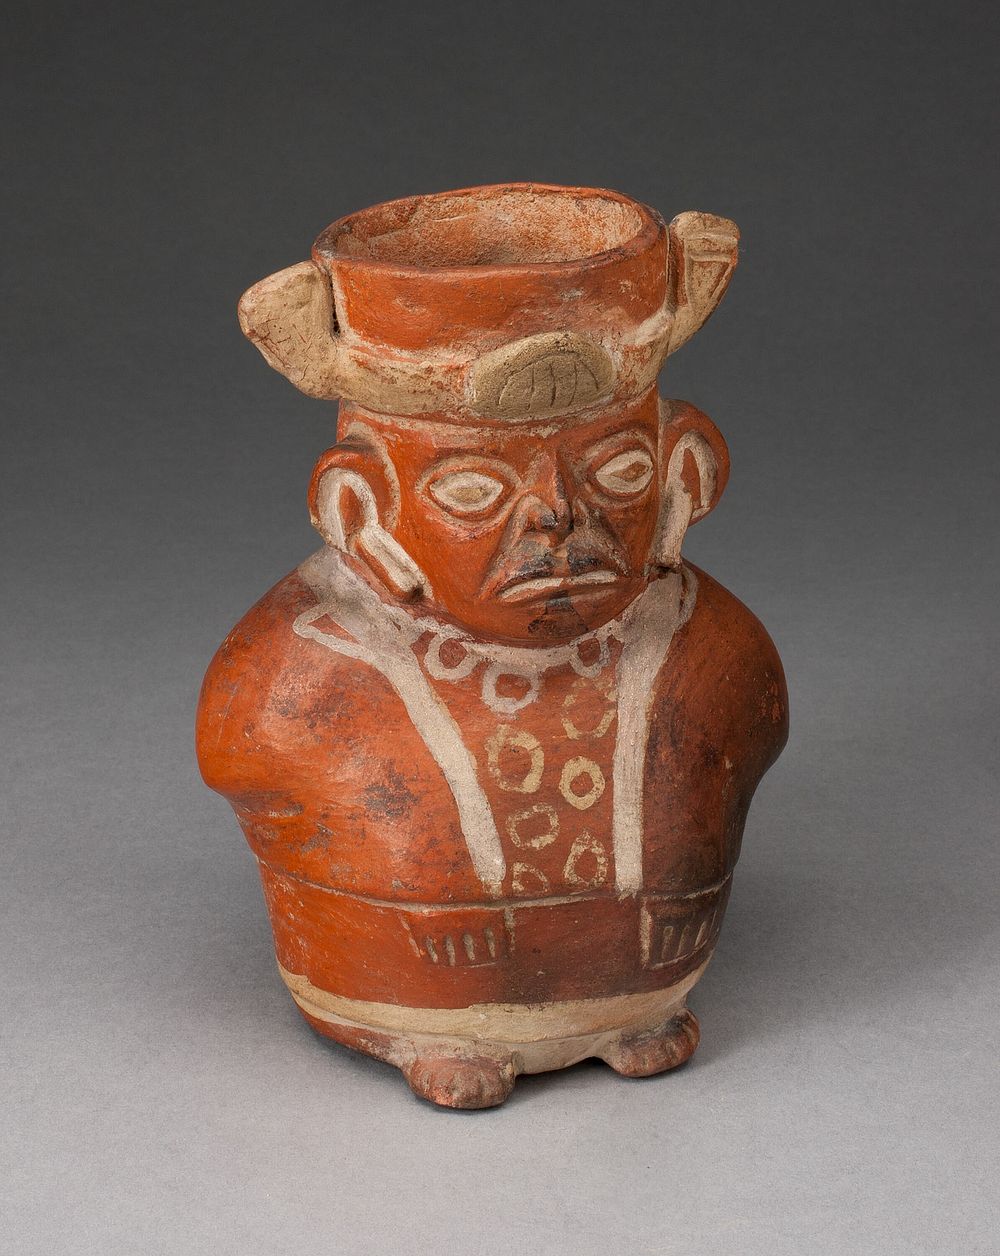 Jar in the Form of a Figure with Modeled Head and Painted Tunic by Moche